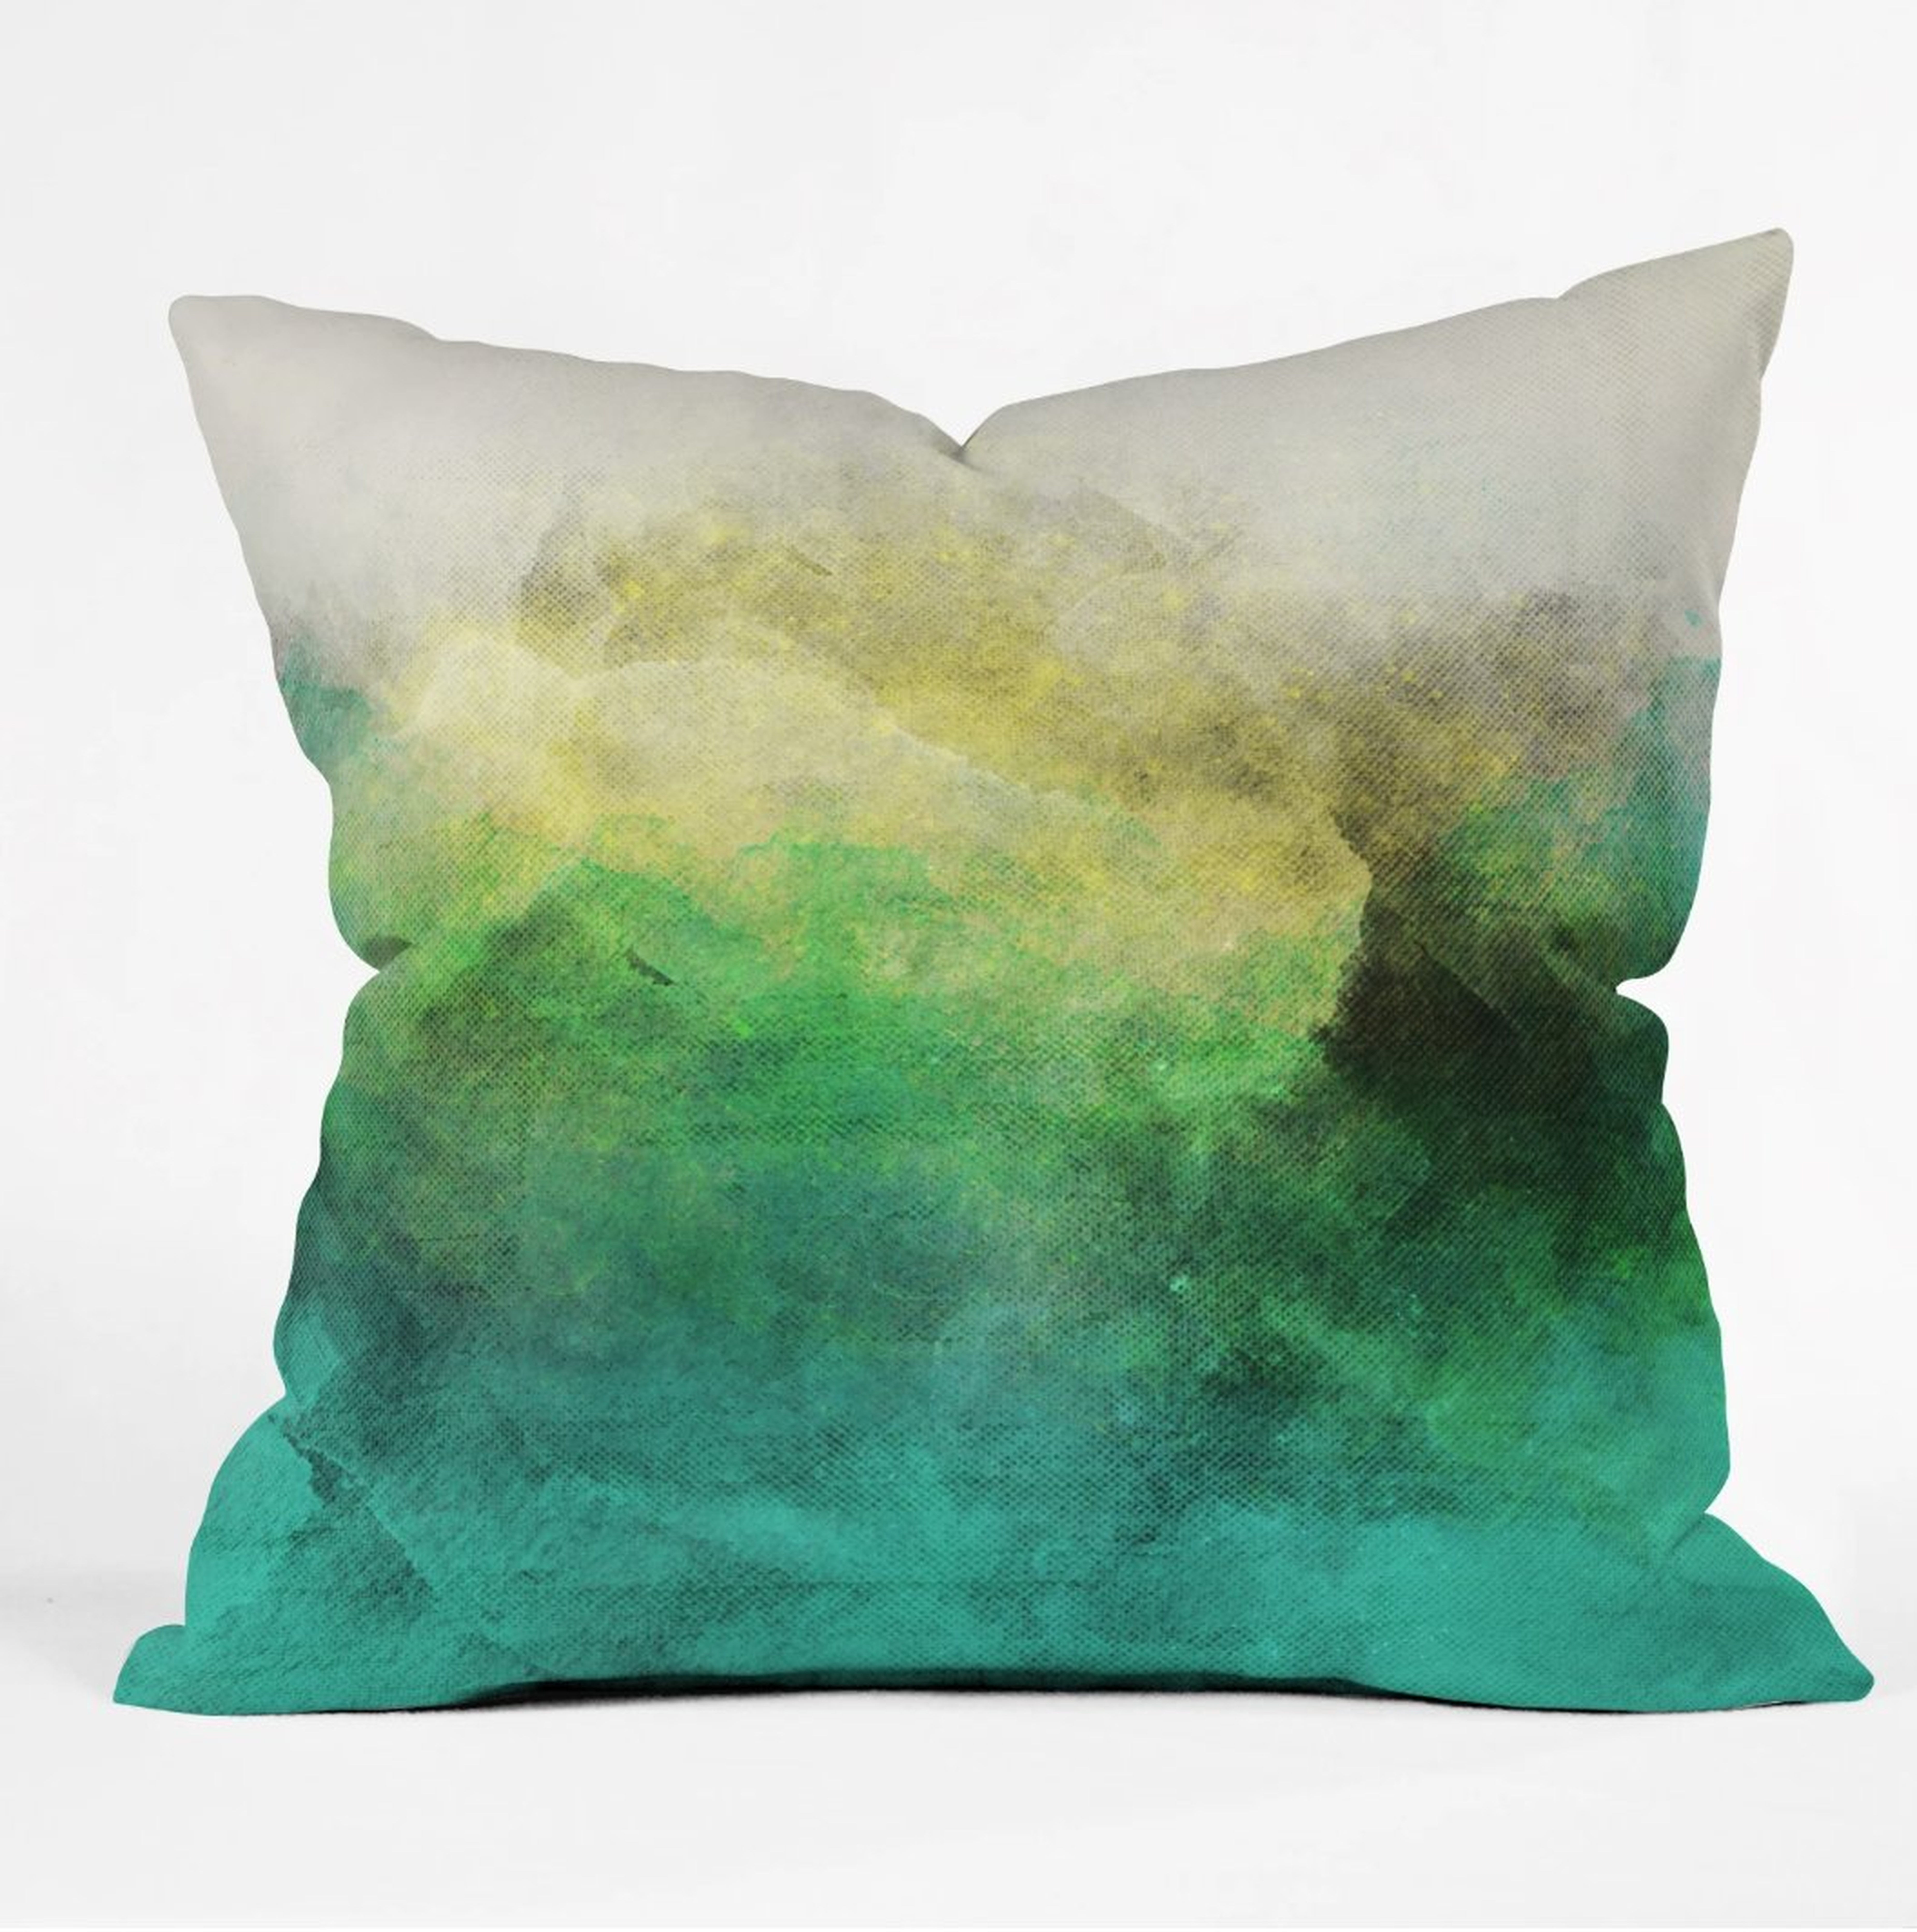 PEACOCK OMBRE THROW PILLOW, 16" x 16", Pillow Cover with Insert - Wander Print Co.